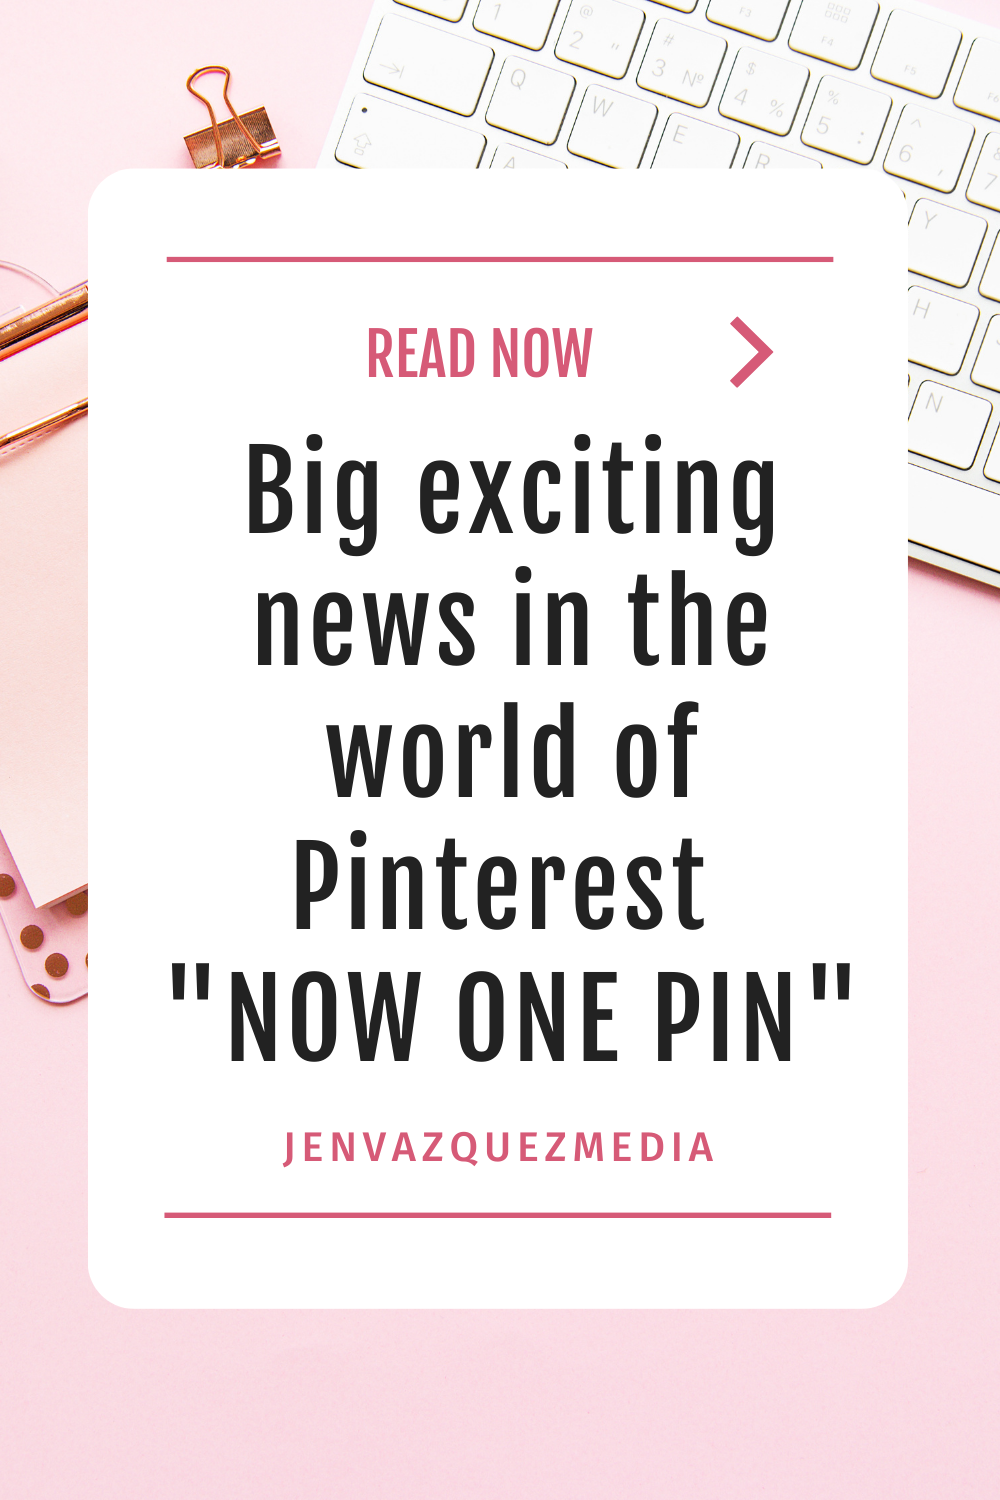 Big exciting news now one organic pin on Pinterest by Jen Vazquez media